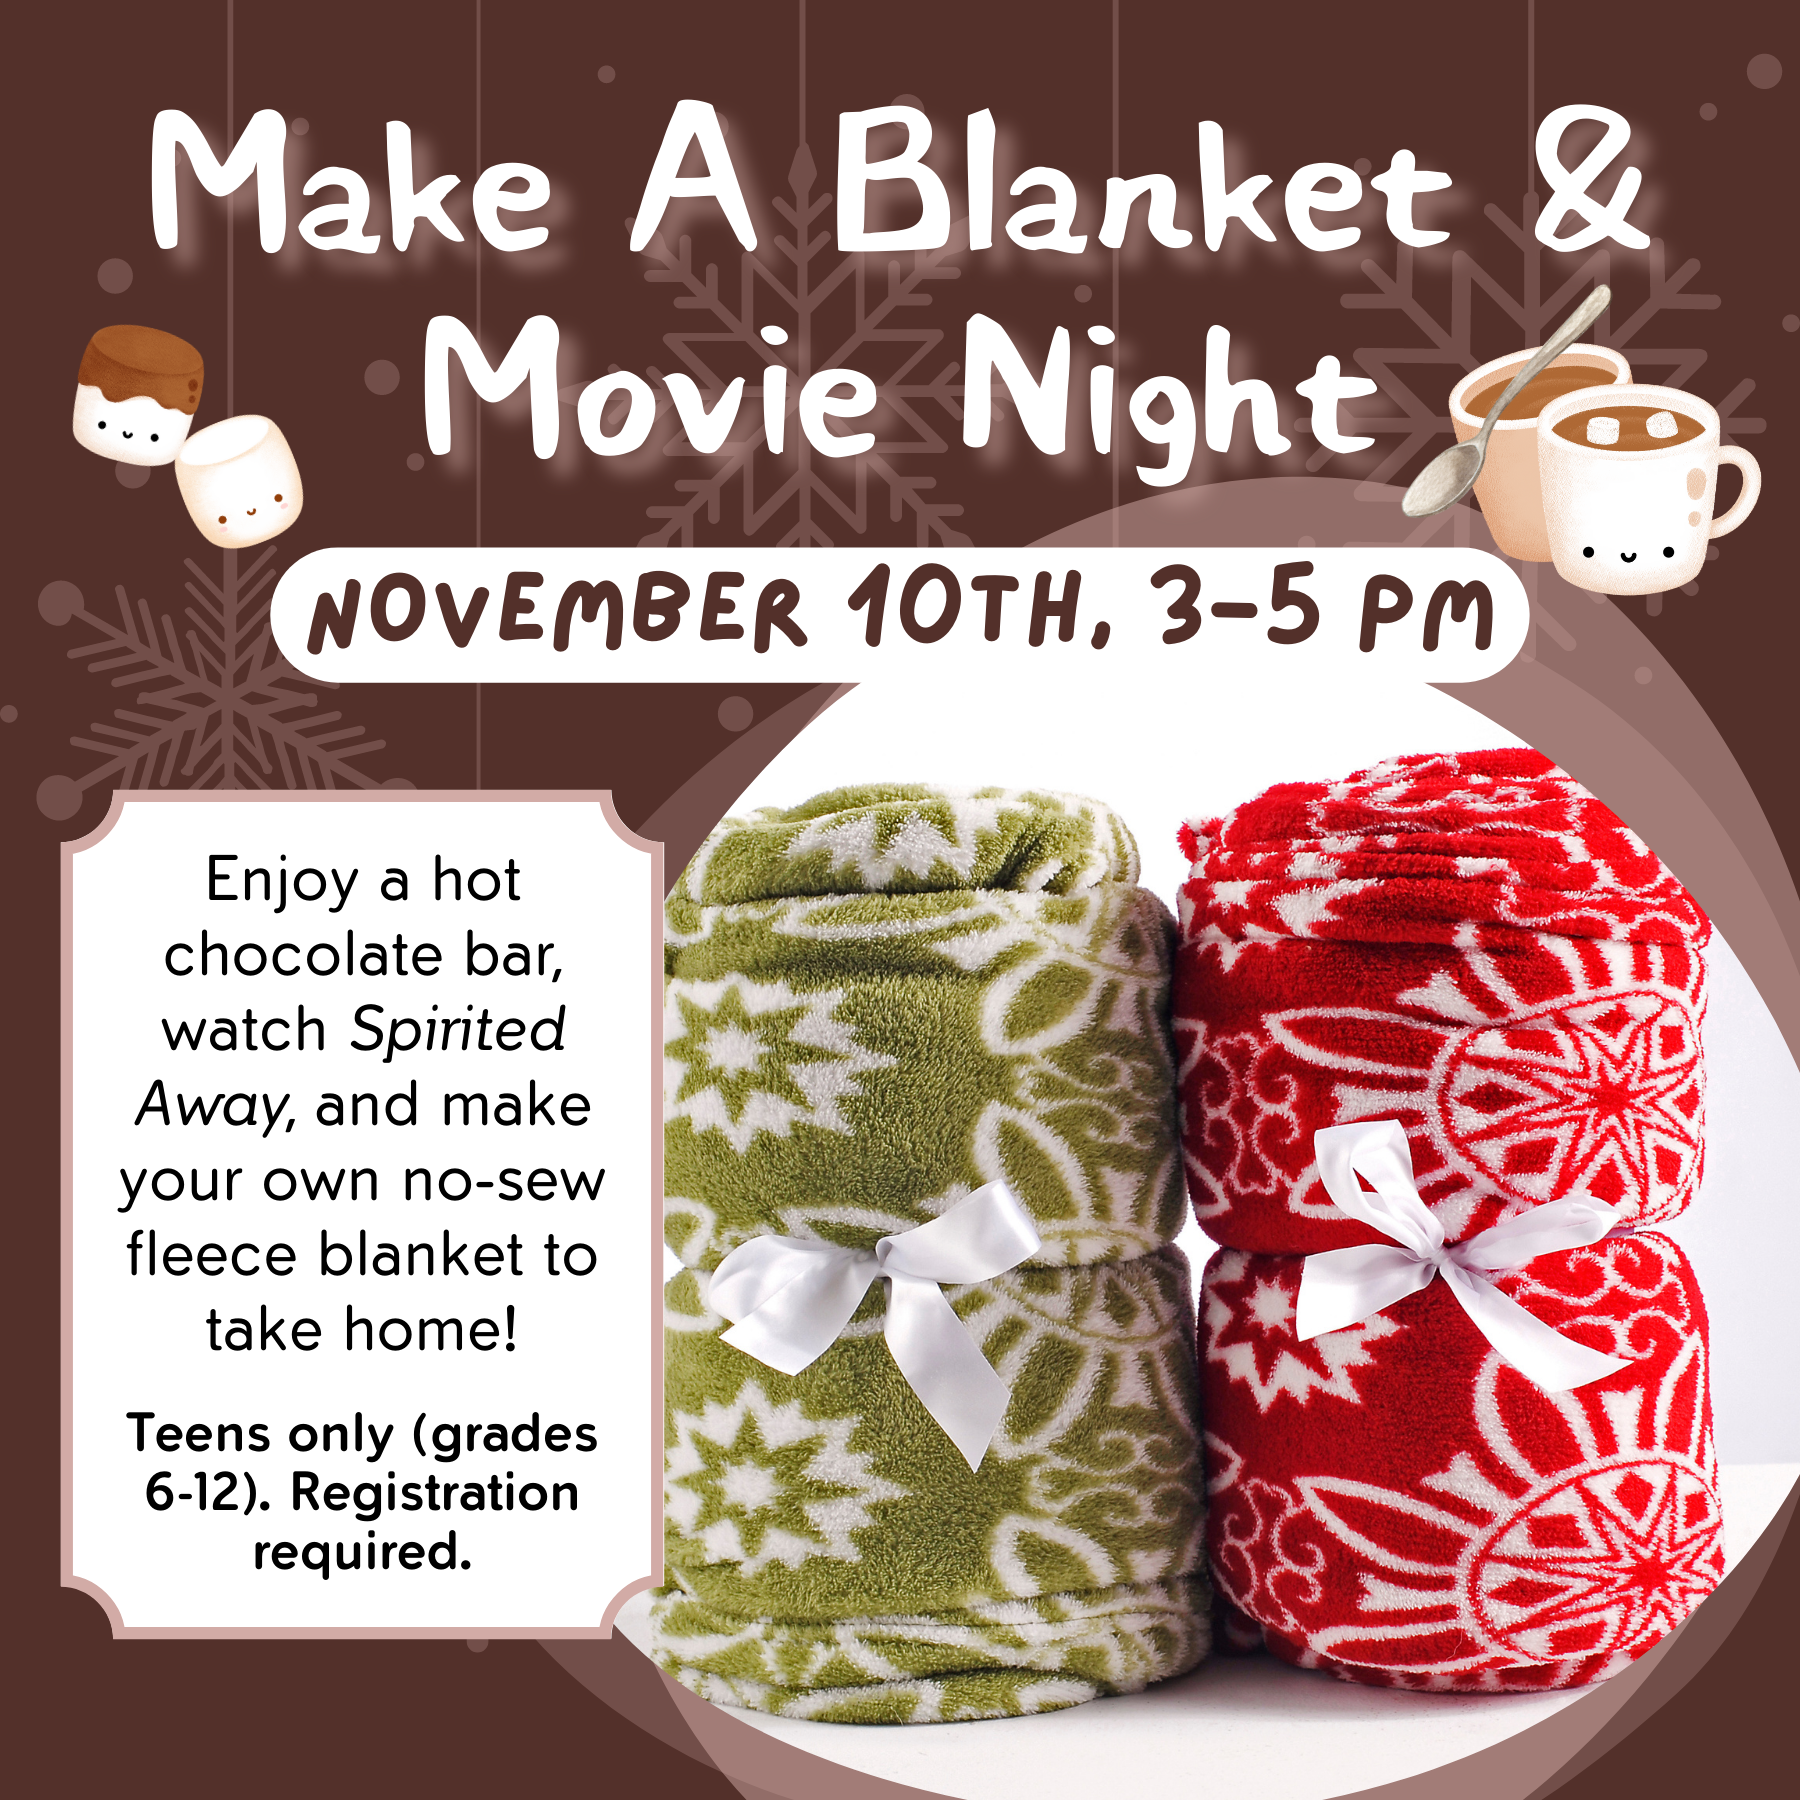 Blanket-Making Movie Party.png